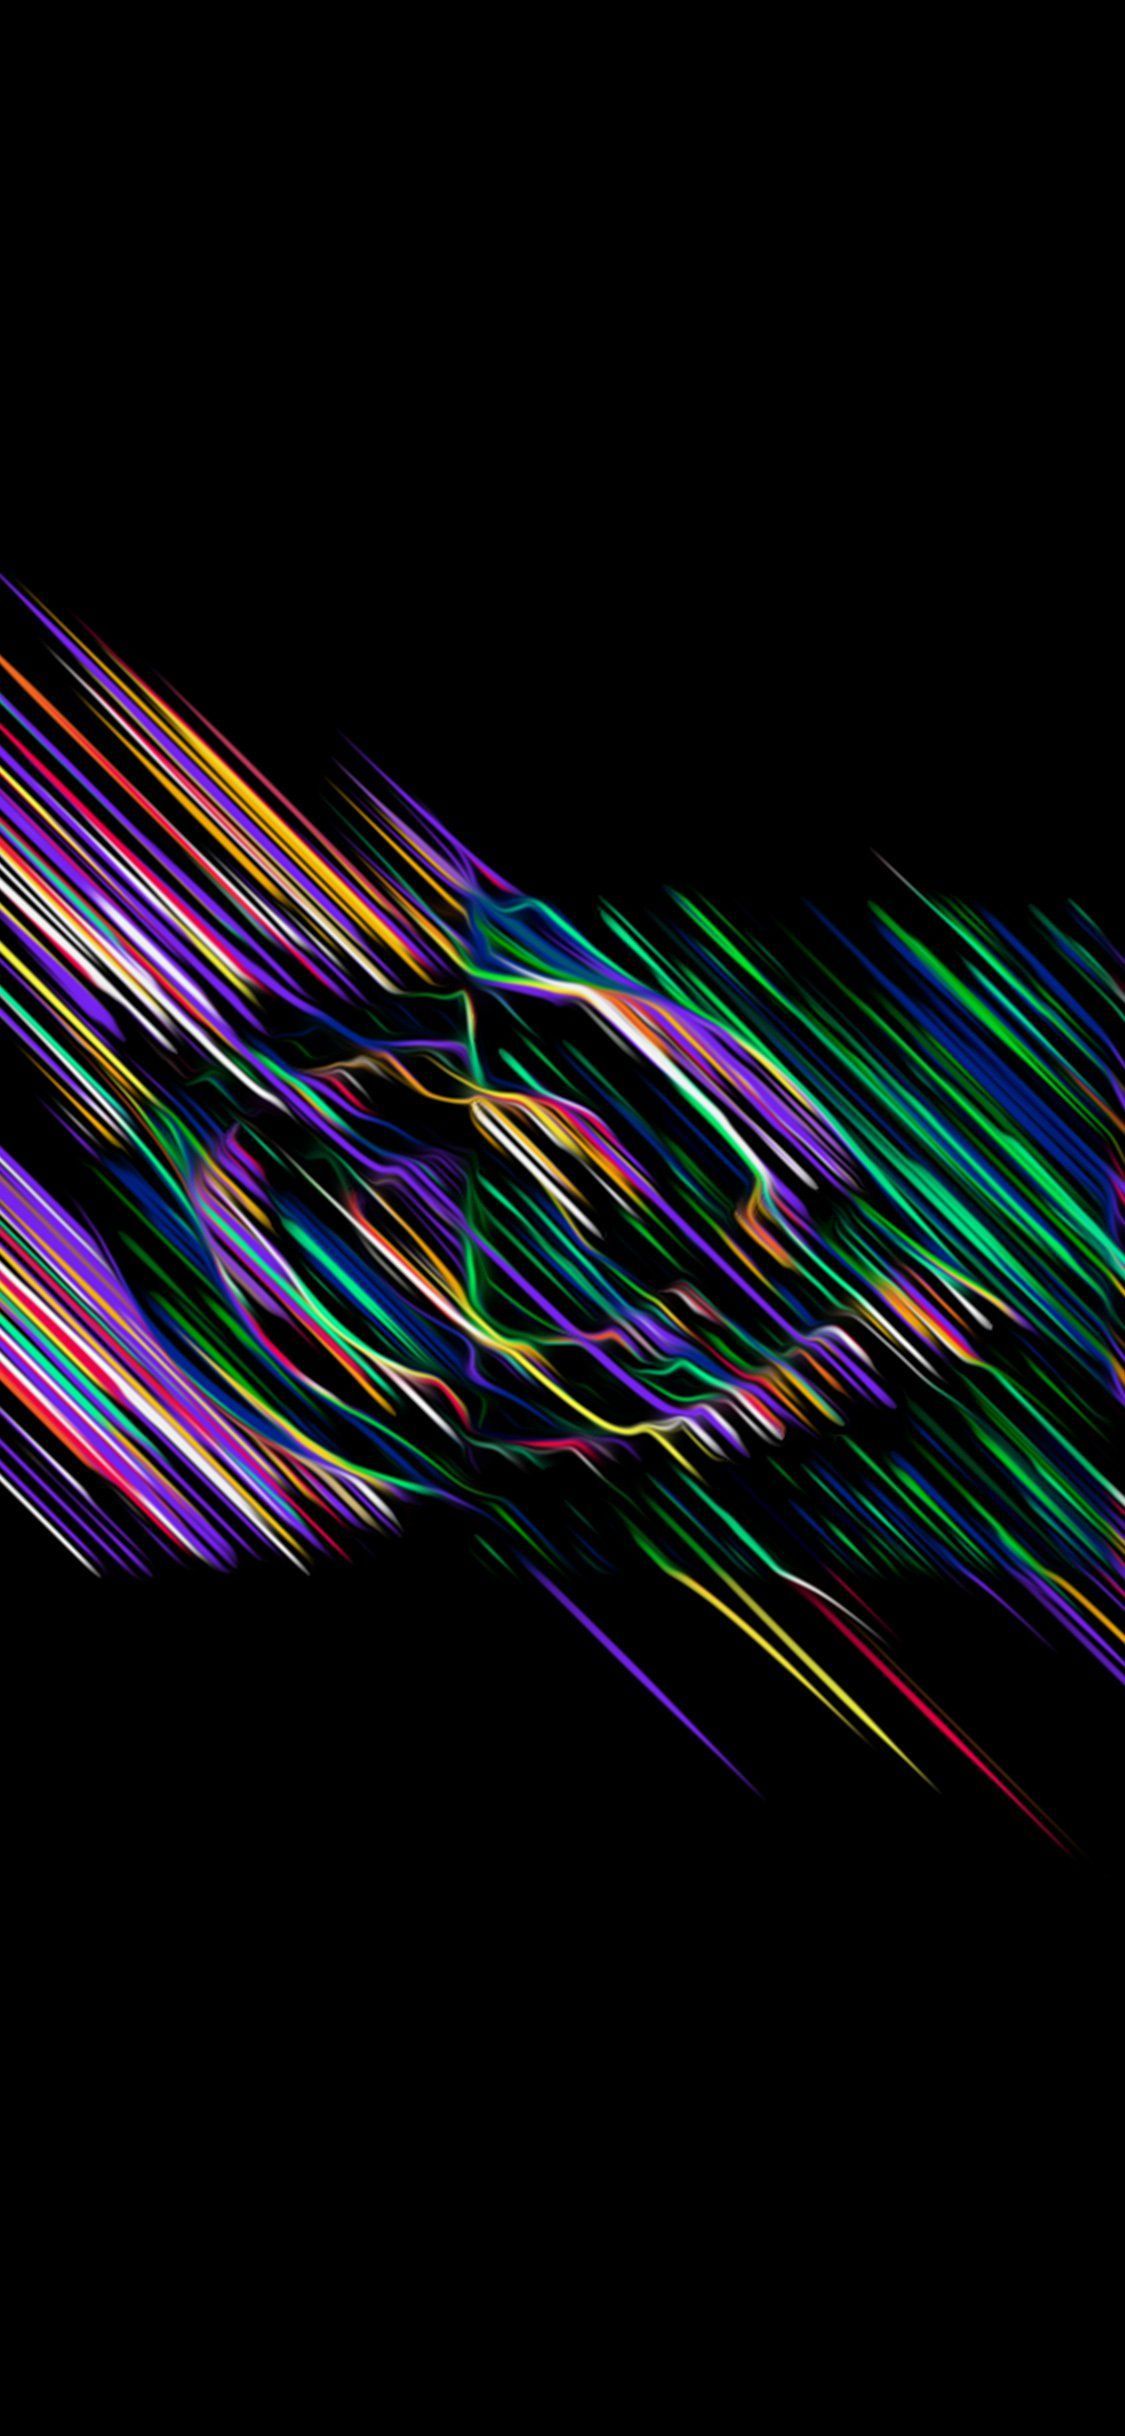 A colorful abstract image with lines and shapes - Colorful, dark, pattern, rainbows